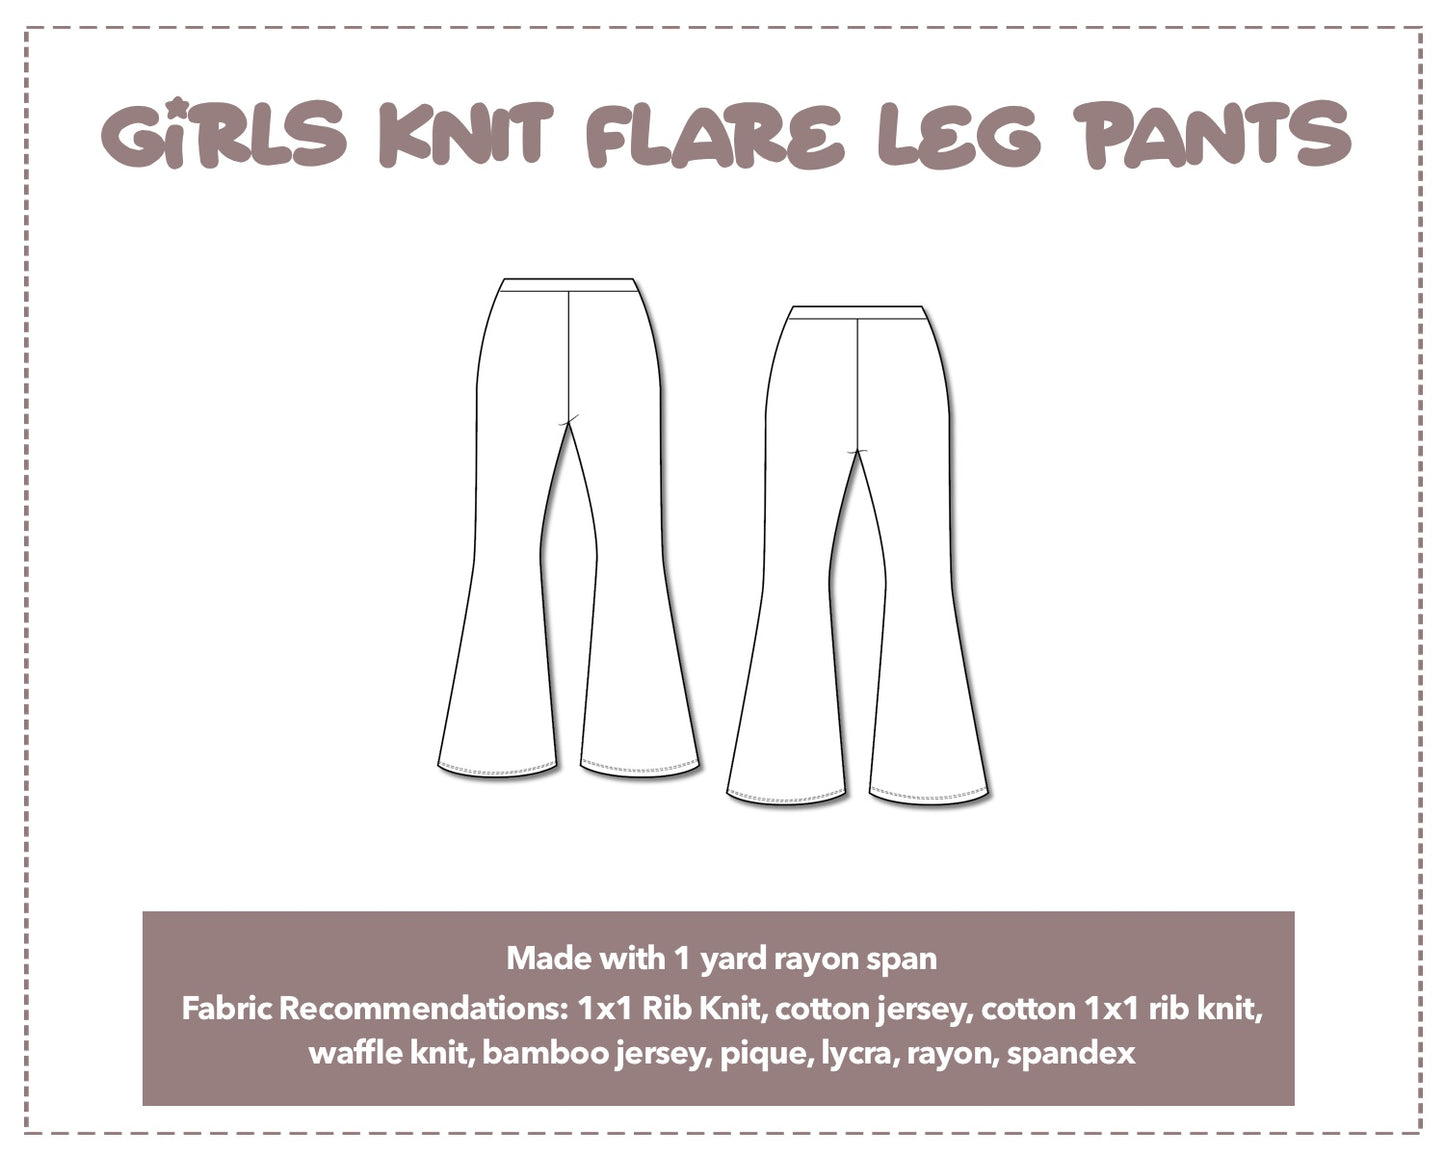 Illustration and detailed description for Knit Flare Leg Pants sewing pattern.